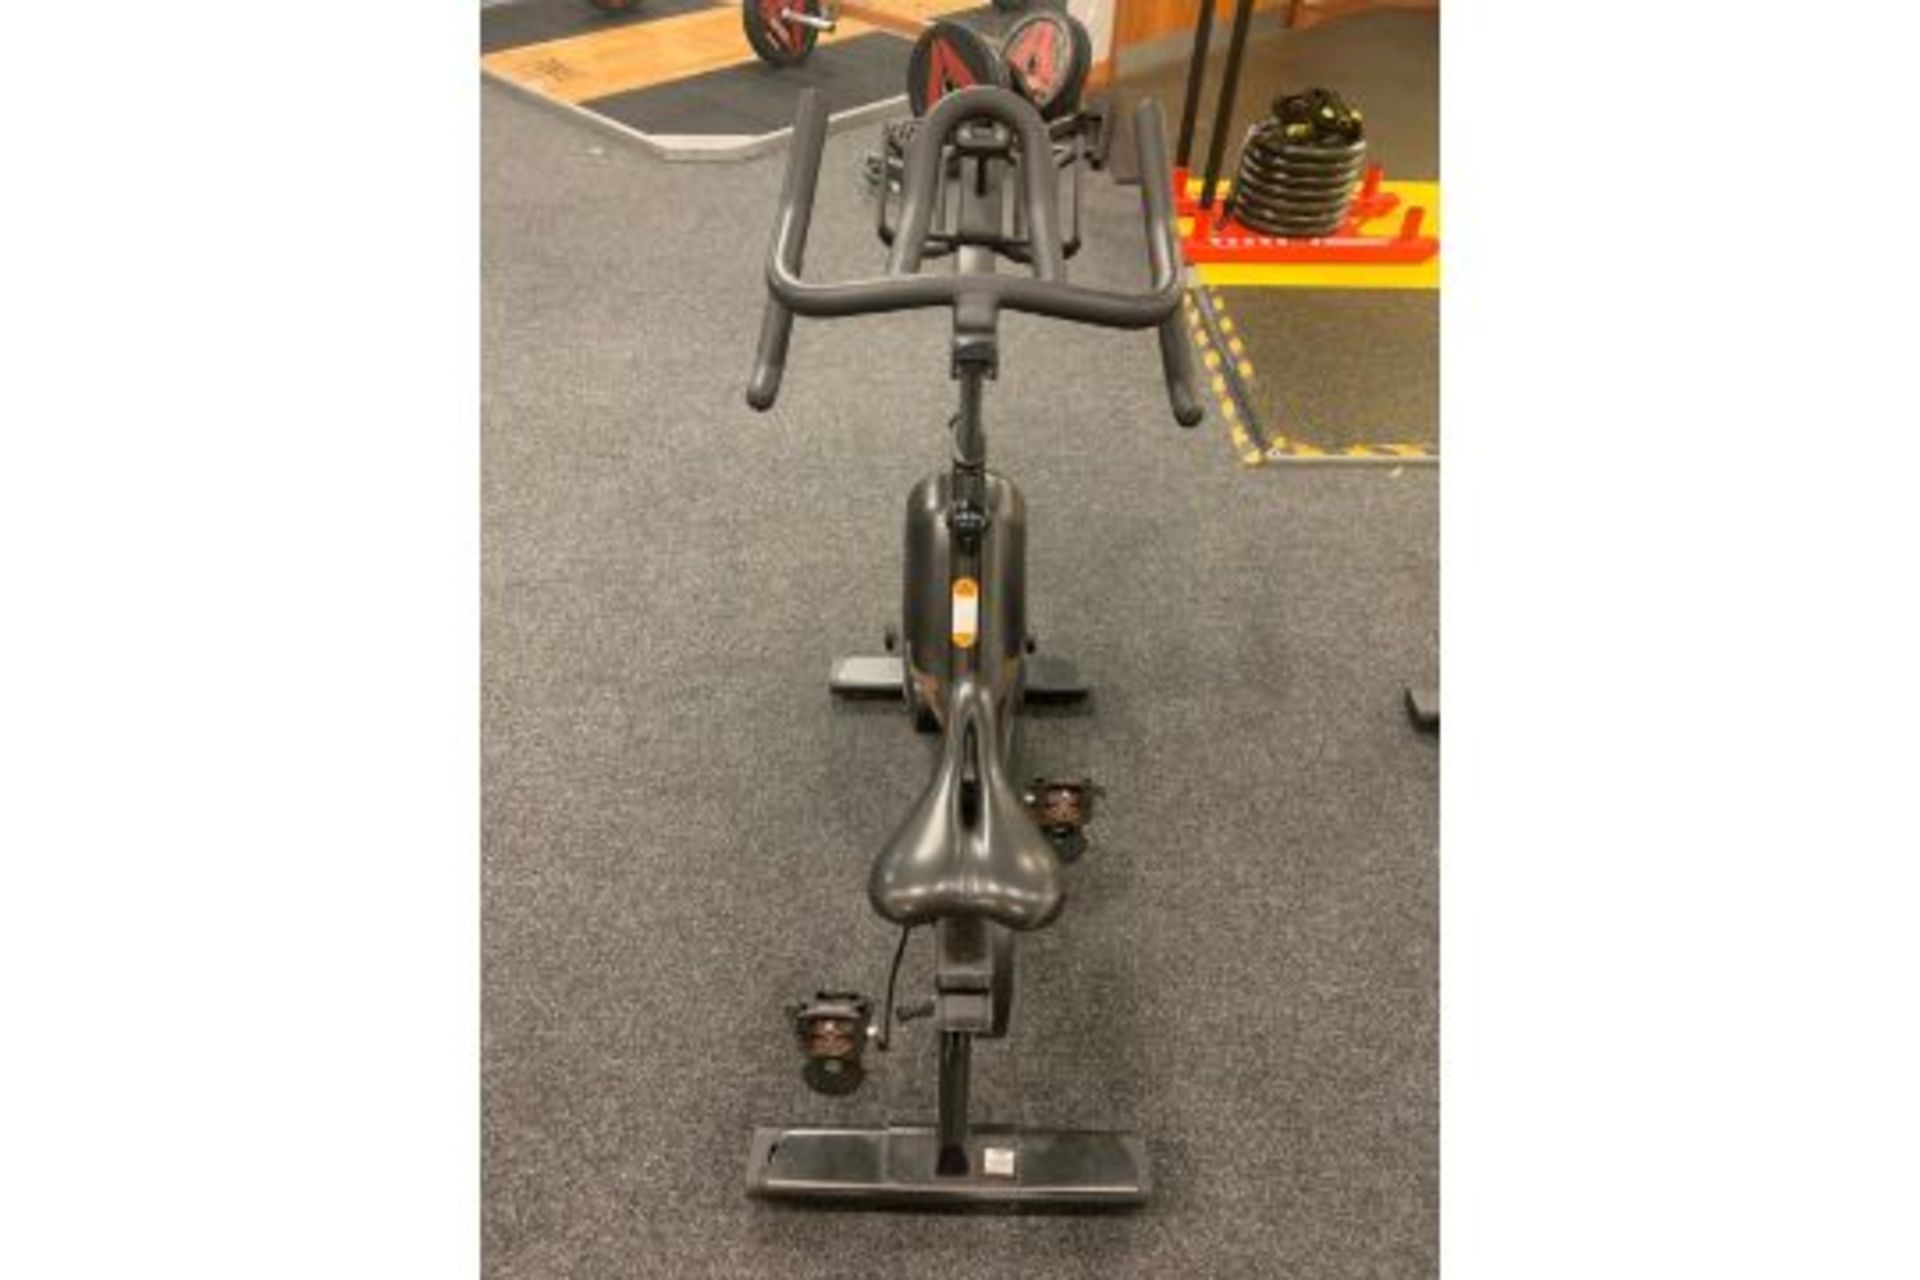 F Series Spin Bike - Image 2 of 3